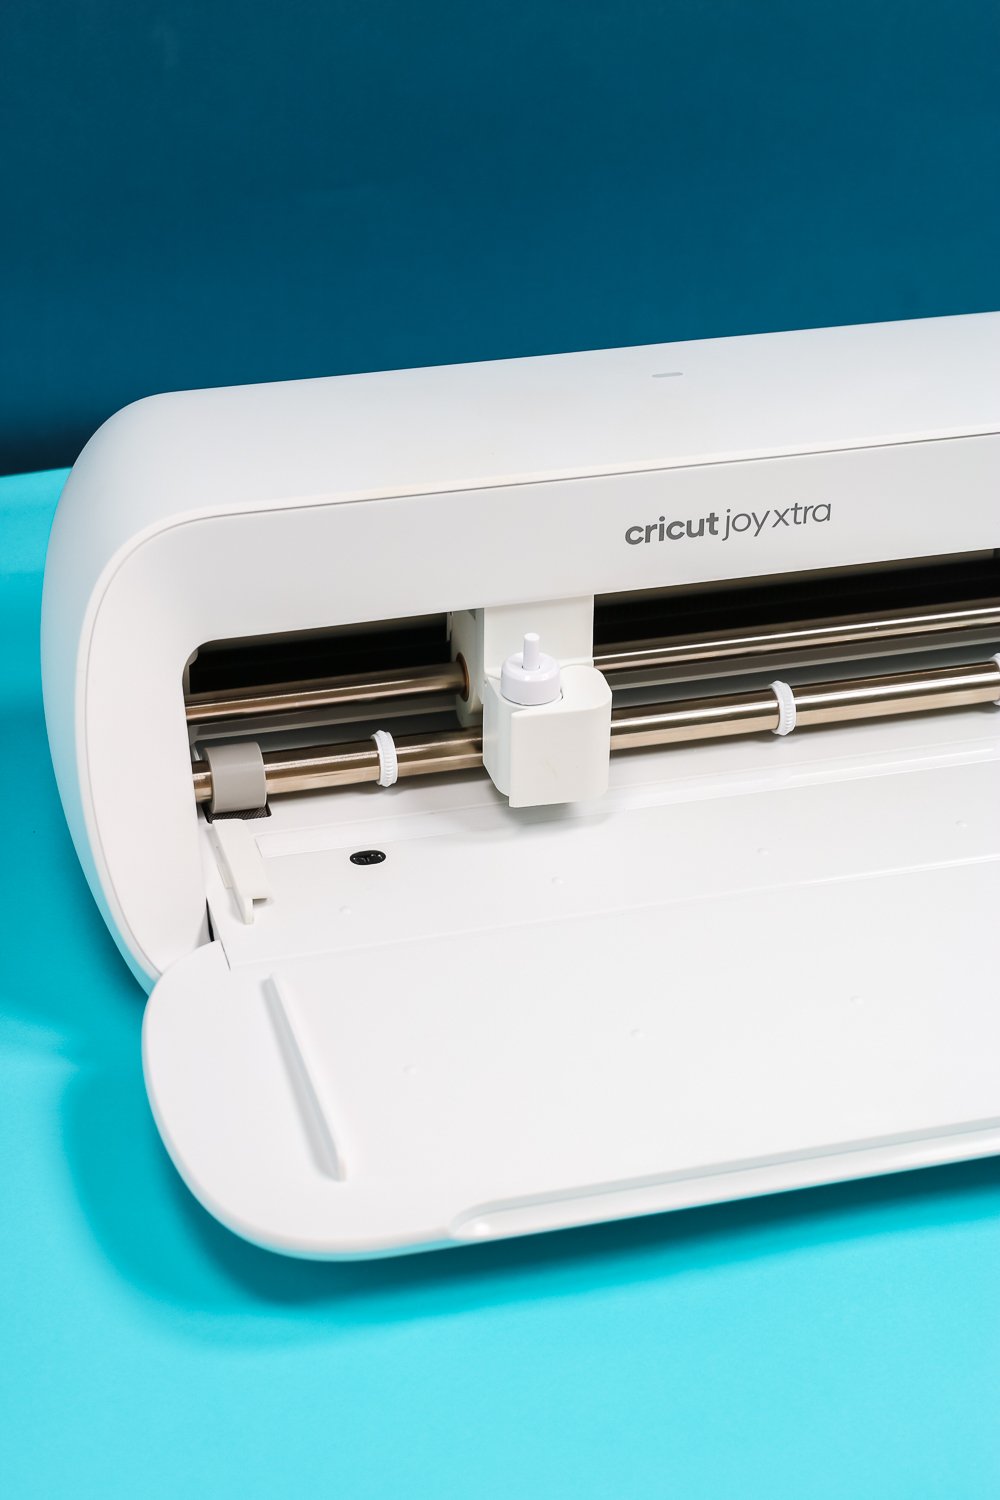 What Brands Work With No Mat in Cricut 3 Machines - Angie Holden The  Country Chic Cottage